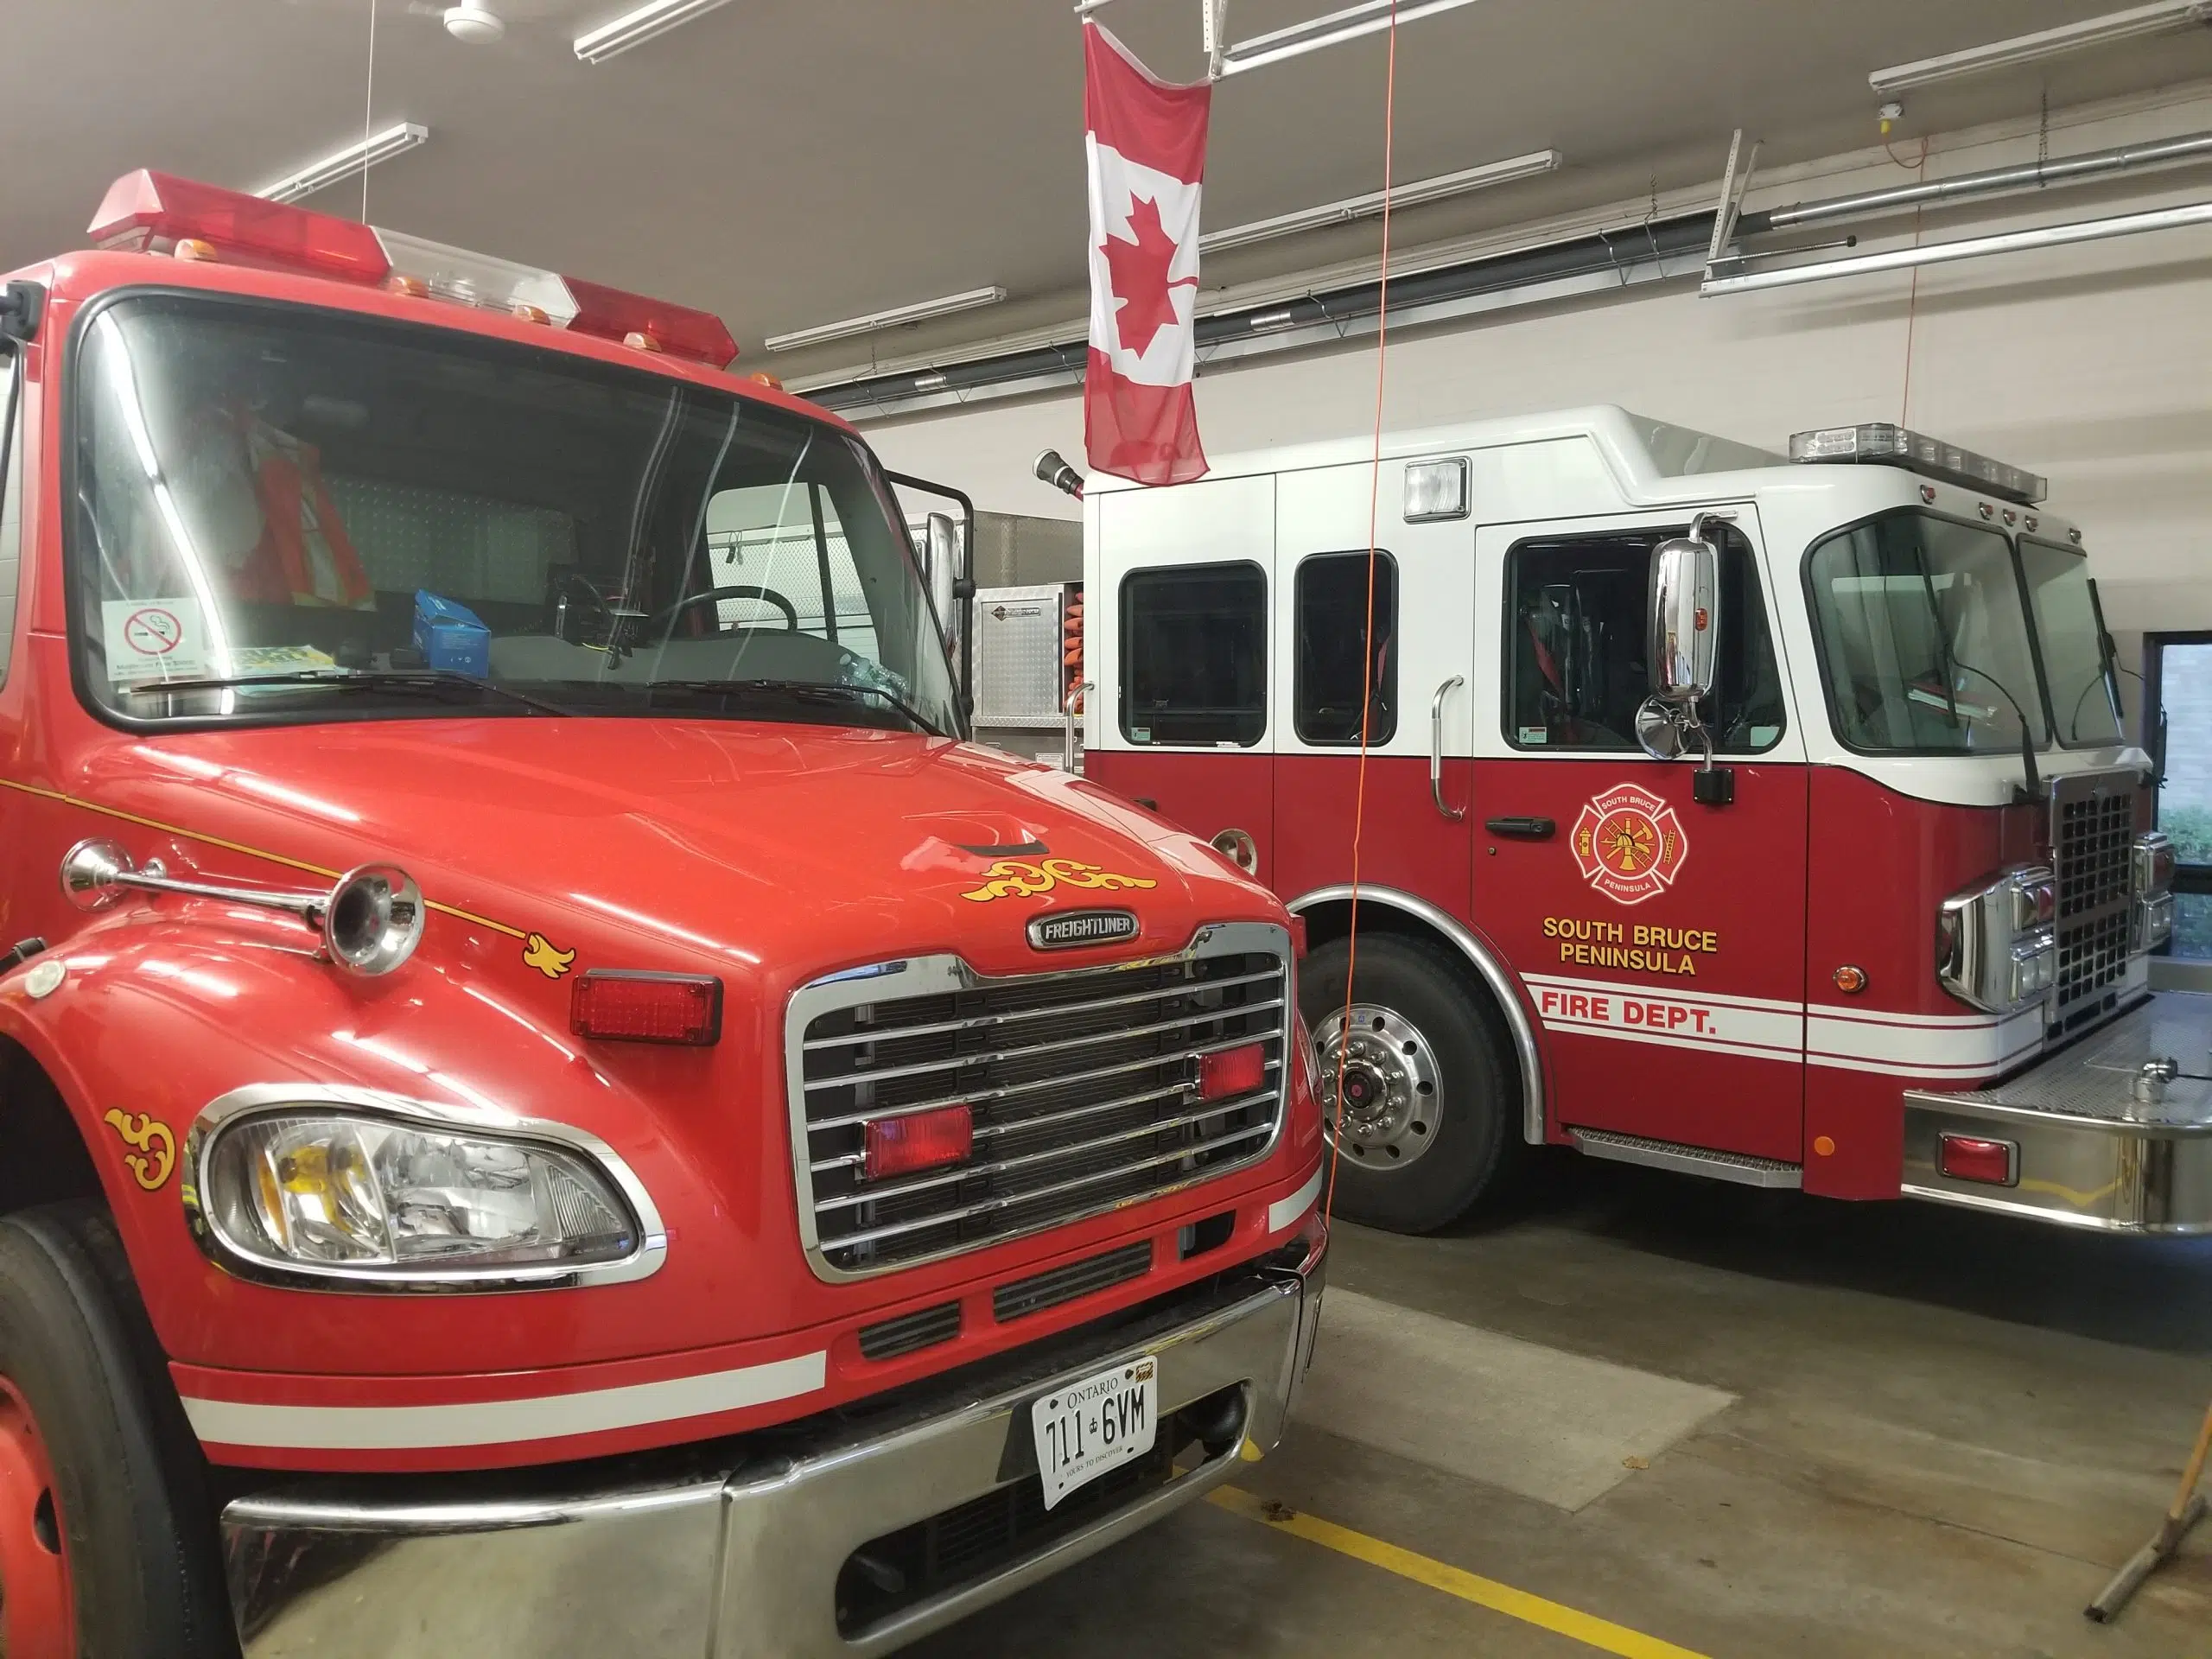 South Bruce Peninsula Fire Department Attends Two Separate Fires In Same Day